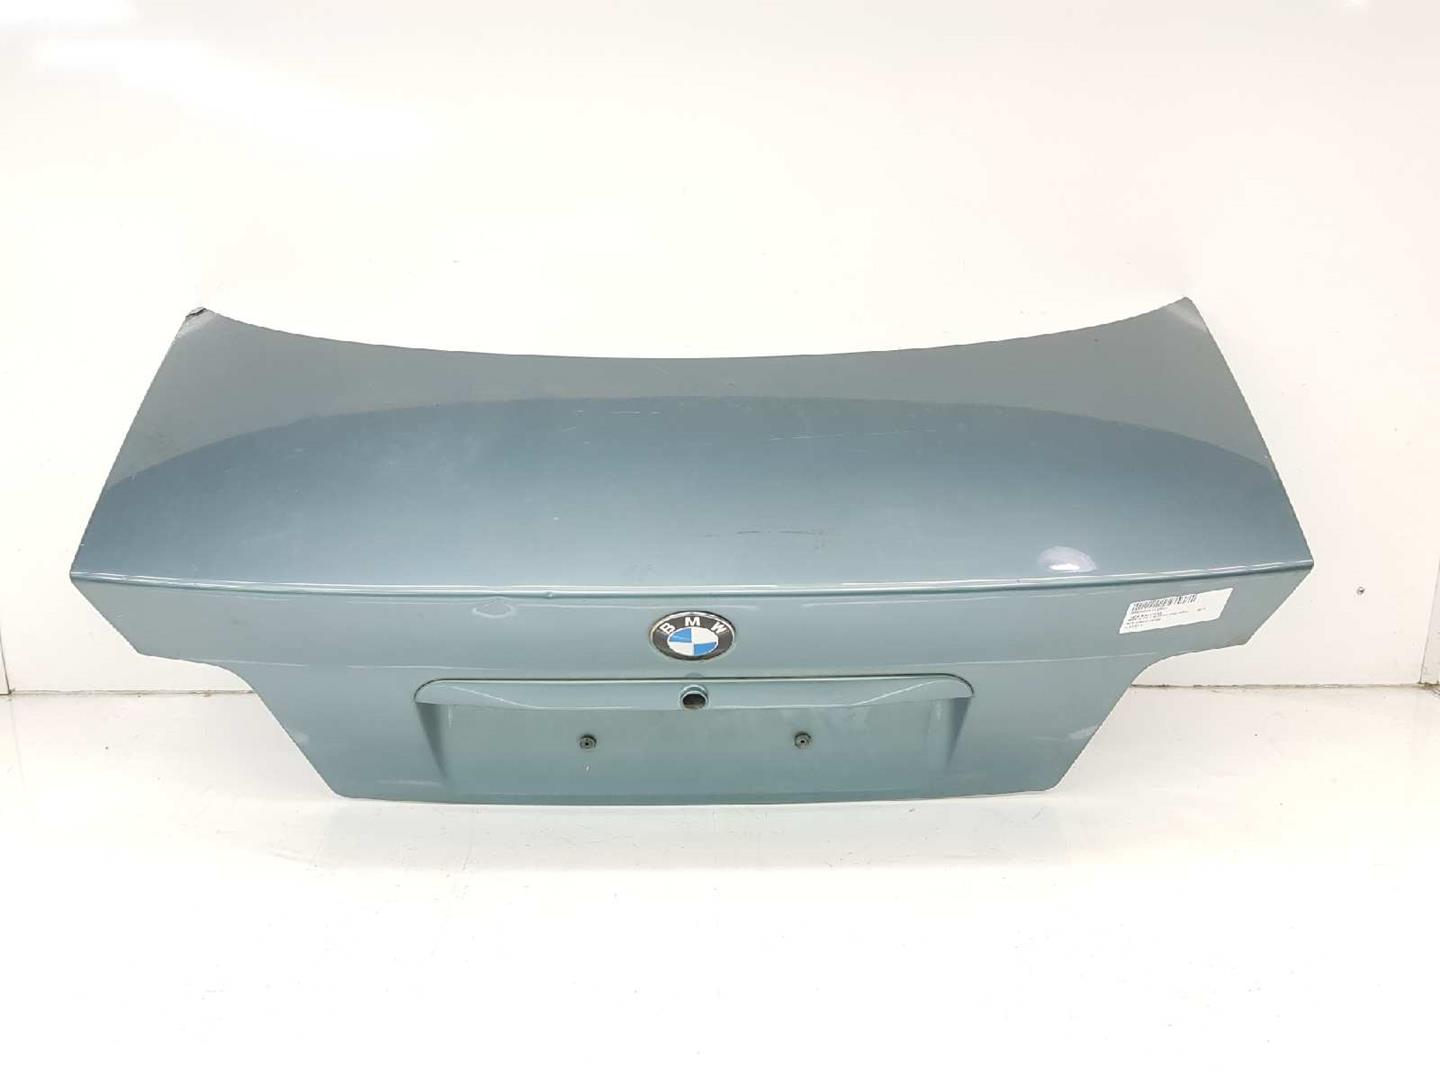 BMW 3 Series E36 (1990-2000) Bootlid Rear Boot 41628119706, 41628119706 19653656